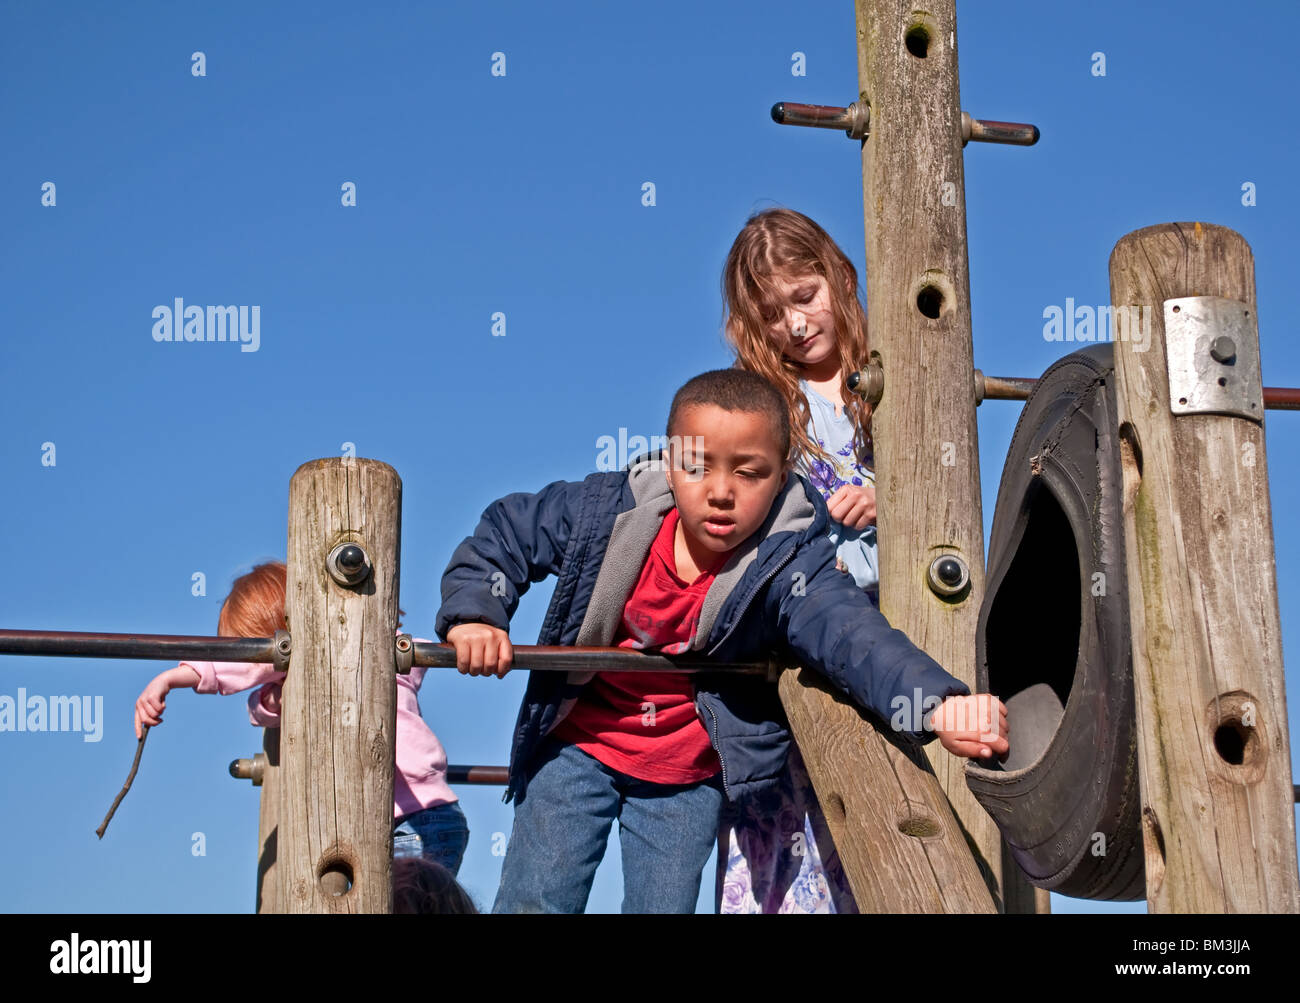 This photo shows diverse children of various cultural races playing outdoors at a park with a bright blue clear sky. Stock Photo